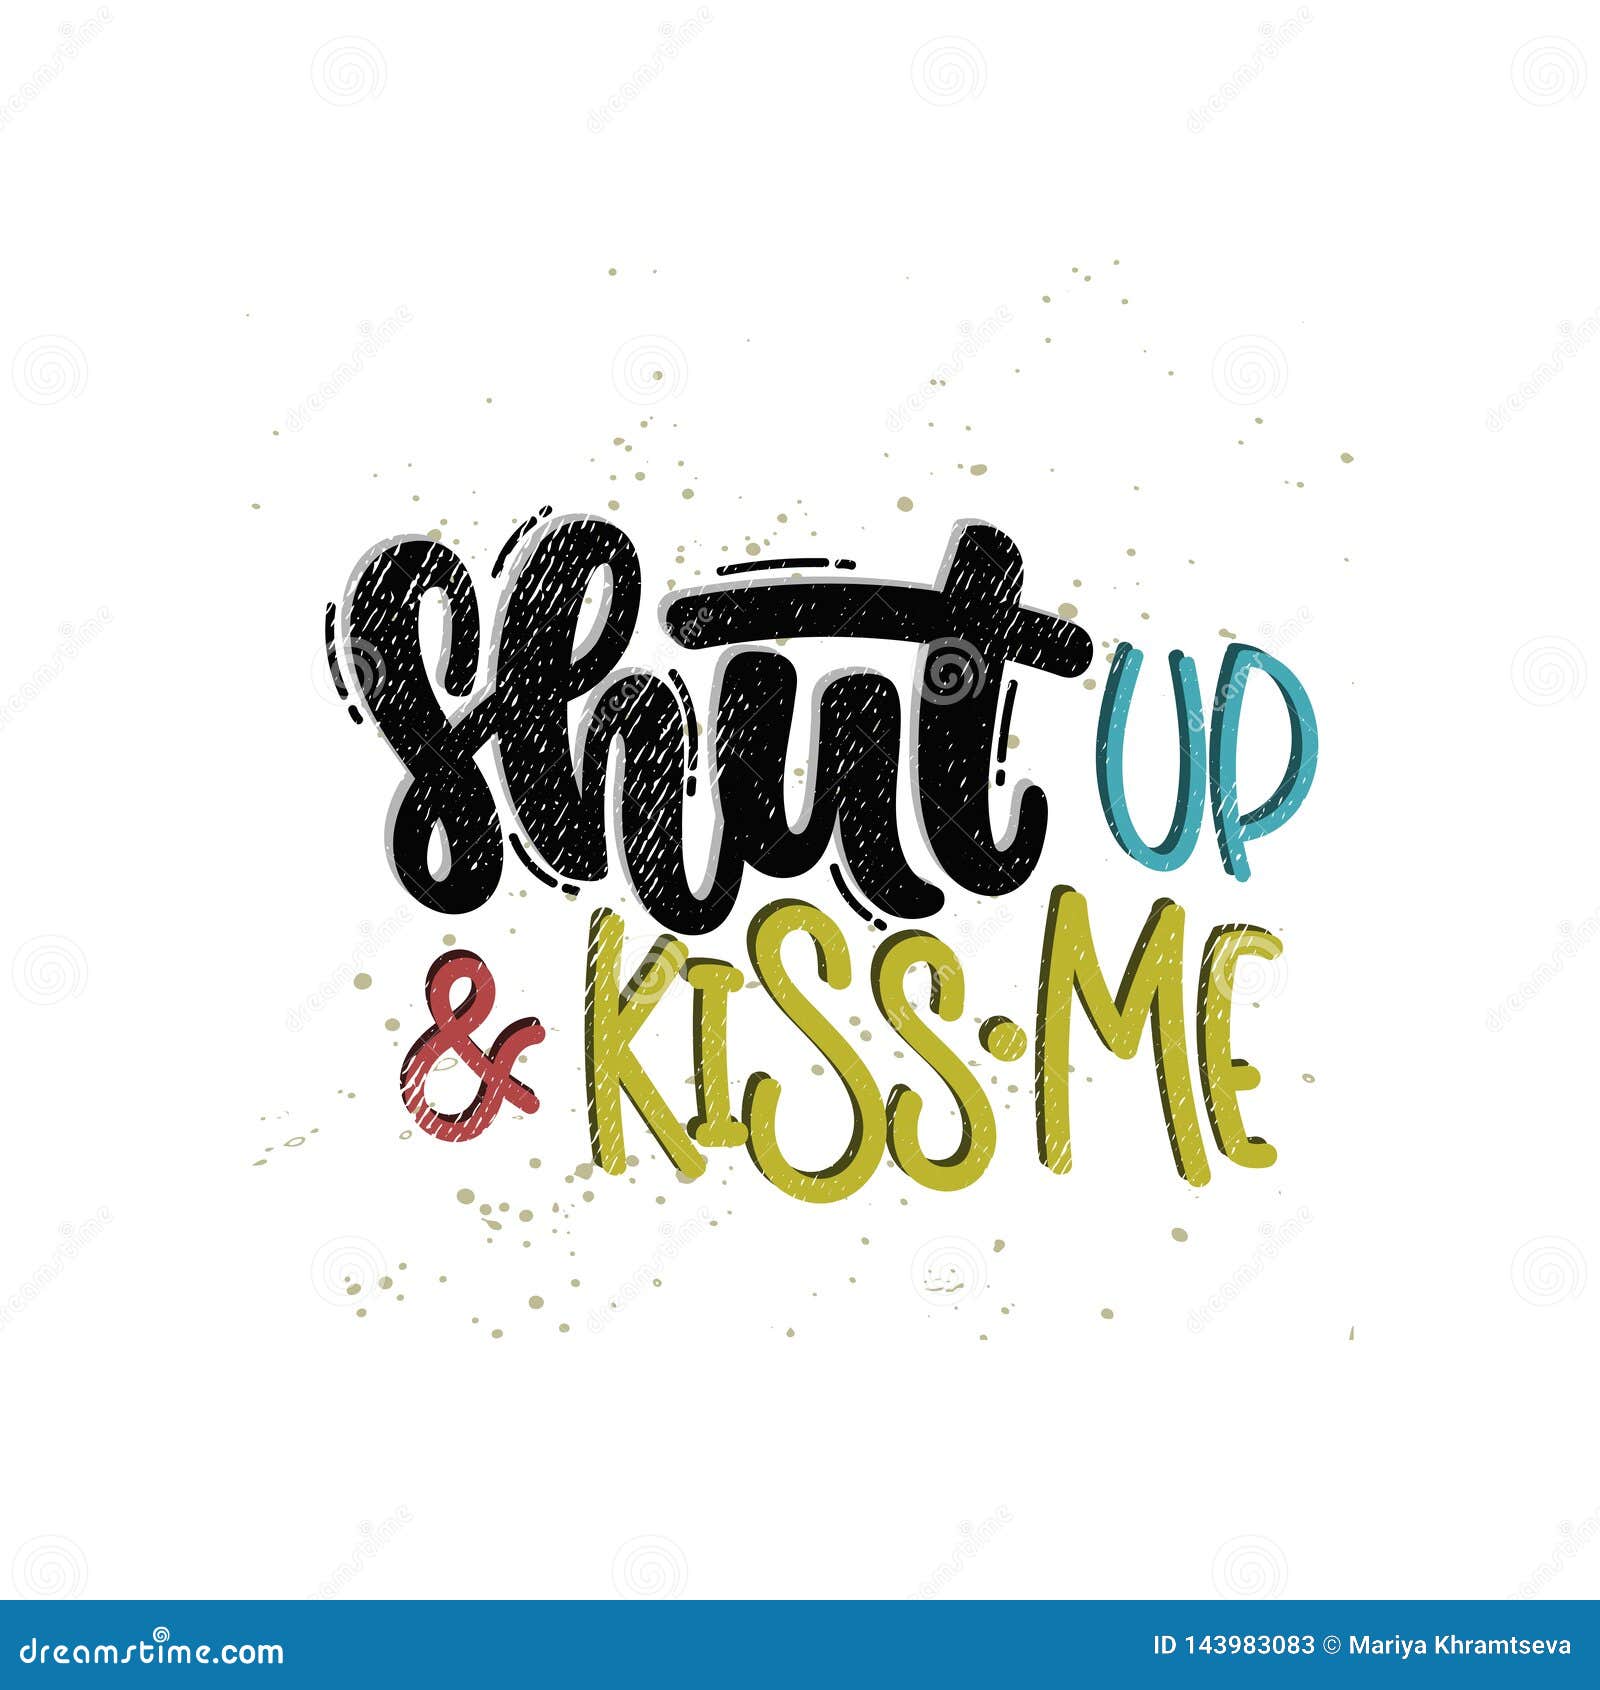 shut up and kiss me images